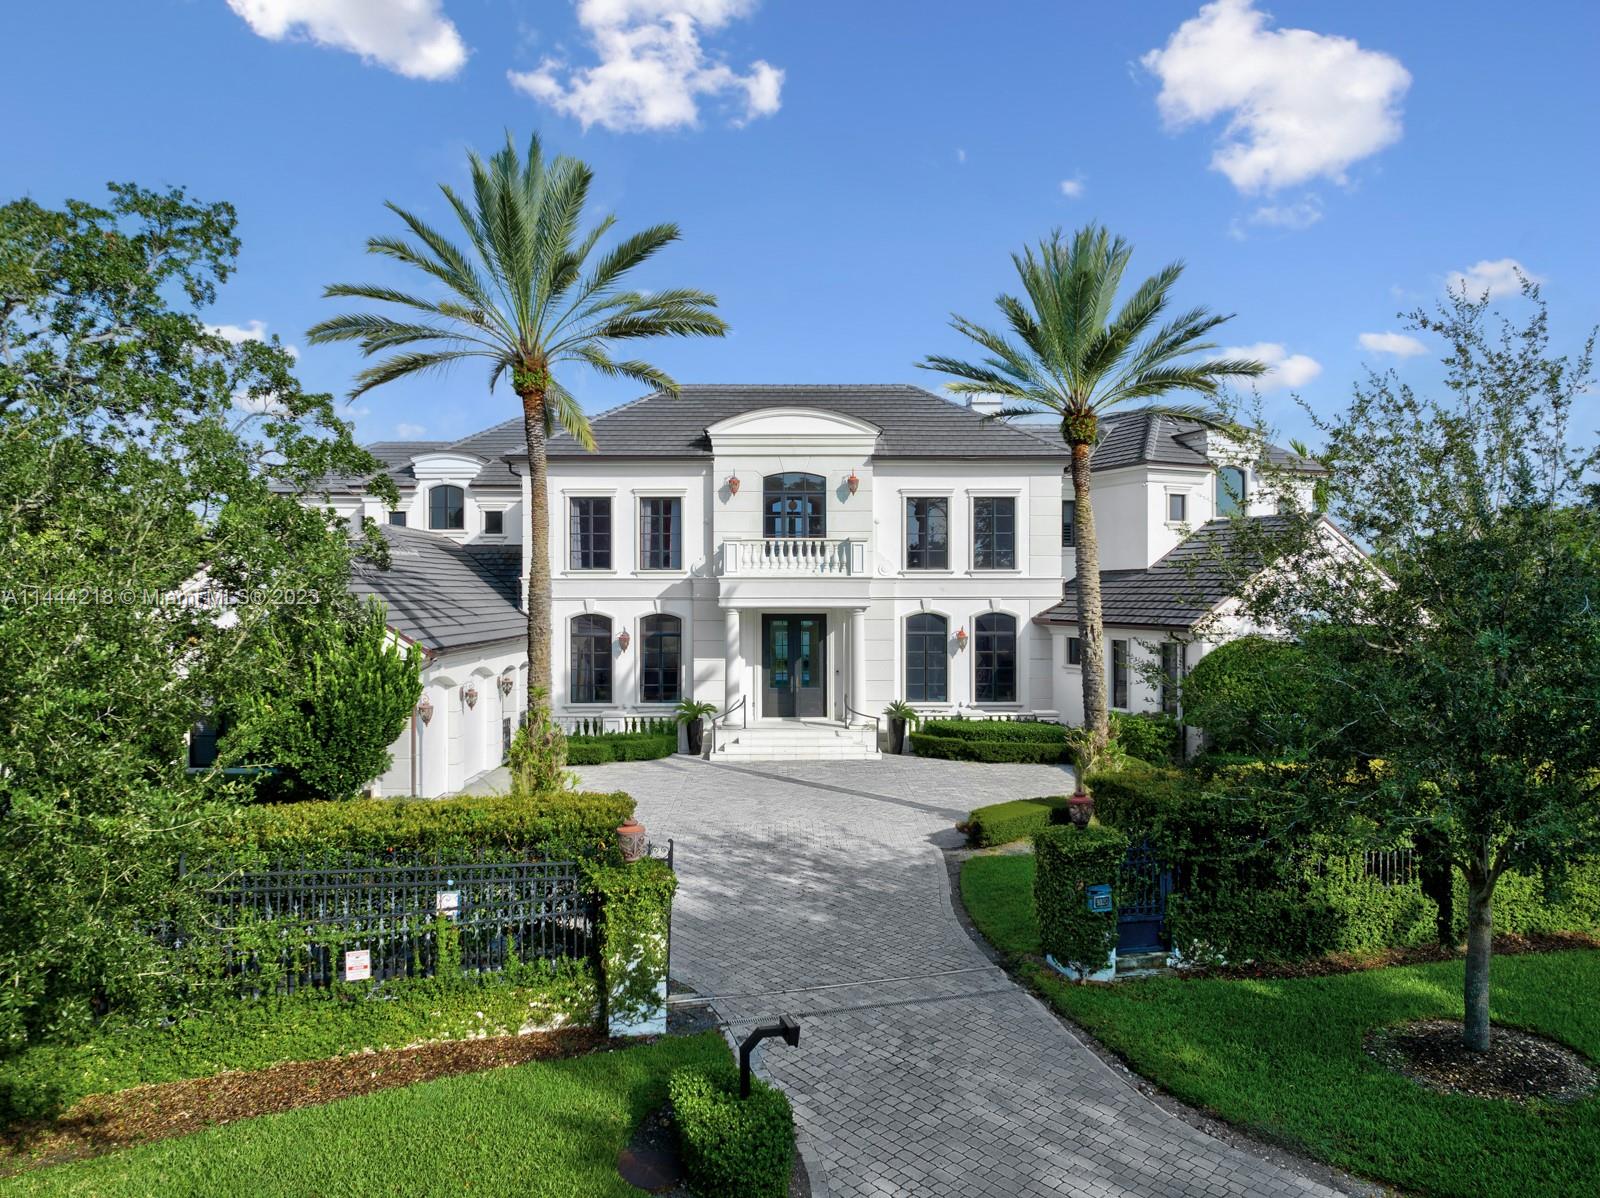 In the highly coveted & gated Coral Gables community of Old Cutler Bay, this stunning residence was designed by famed architect Ramon Pacheco & remodeled in 2015 offering modern luxury living. This architectural marvel showcases a grand foyer with a sweeping staircase & soaring ceilings that welcomes an abundance of natural light and elegance. The focal point of this magnificent estate, however, is the 100' private dock, providing direct ocean access. Features include custom finishes, full house generator, in-home theater, 2 guest suites, staff quarters, and a 4-car garage. Complete with an infinity-edge pool, plenty of covered terraces, and beautiful water views.